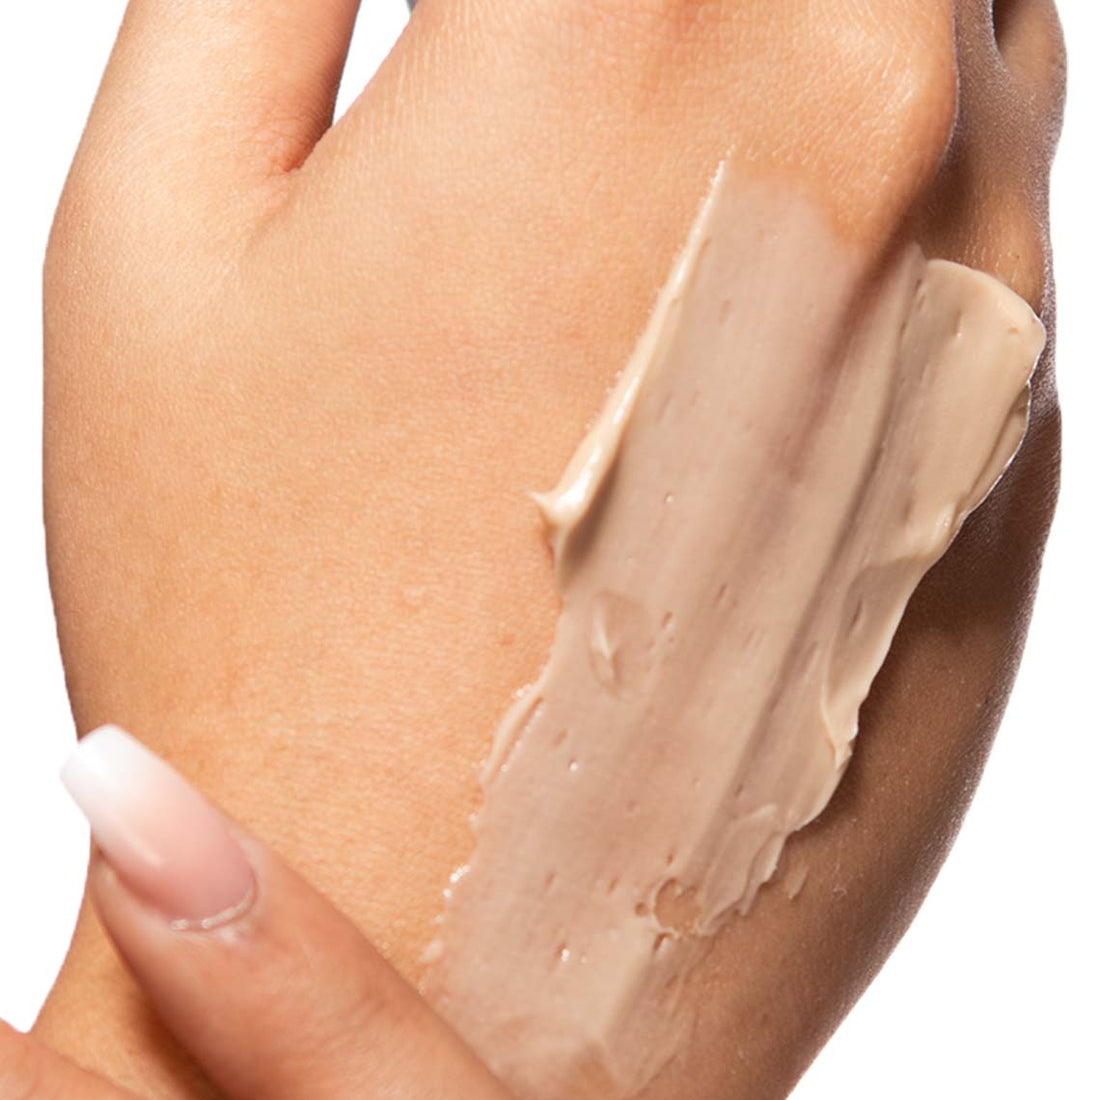 Why use Hand Creams Instead of Body Lotions